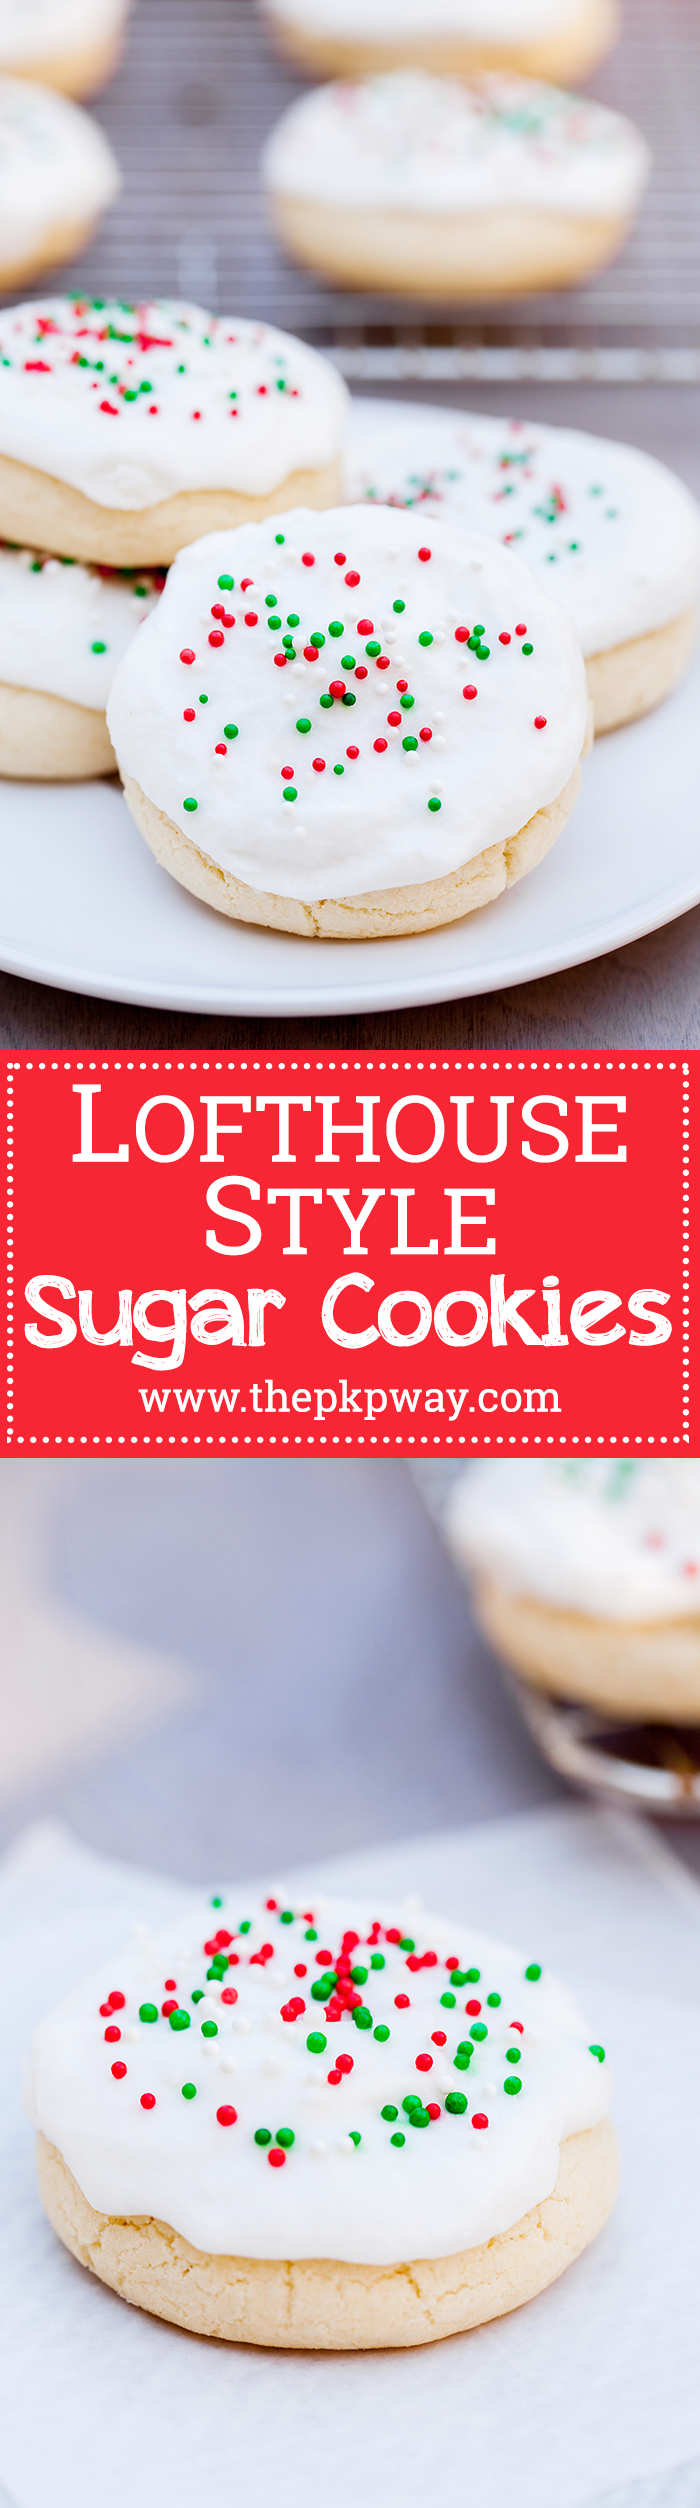 Homemade lofthouse style sugar cookies - simple and nostalgic